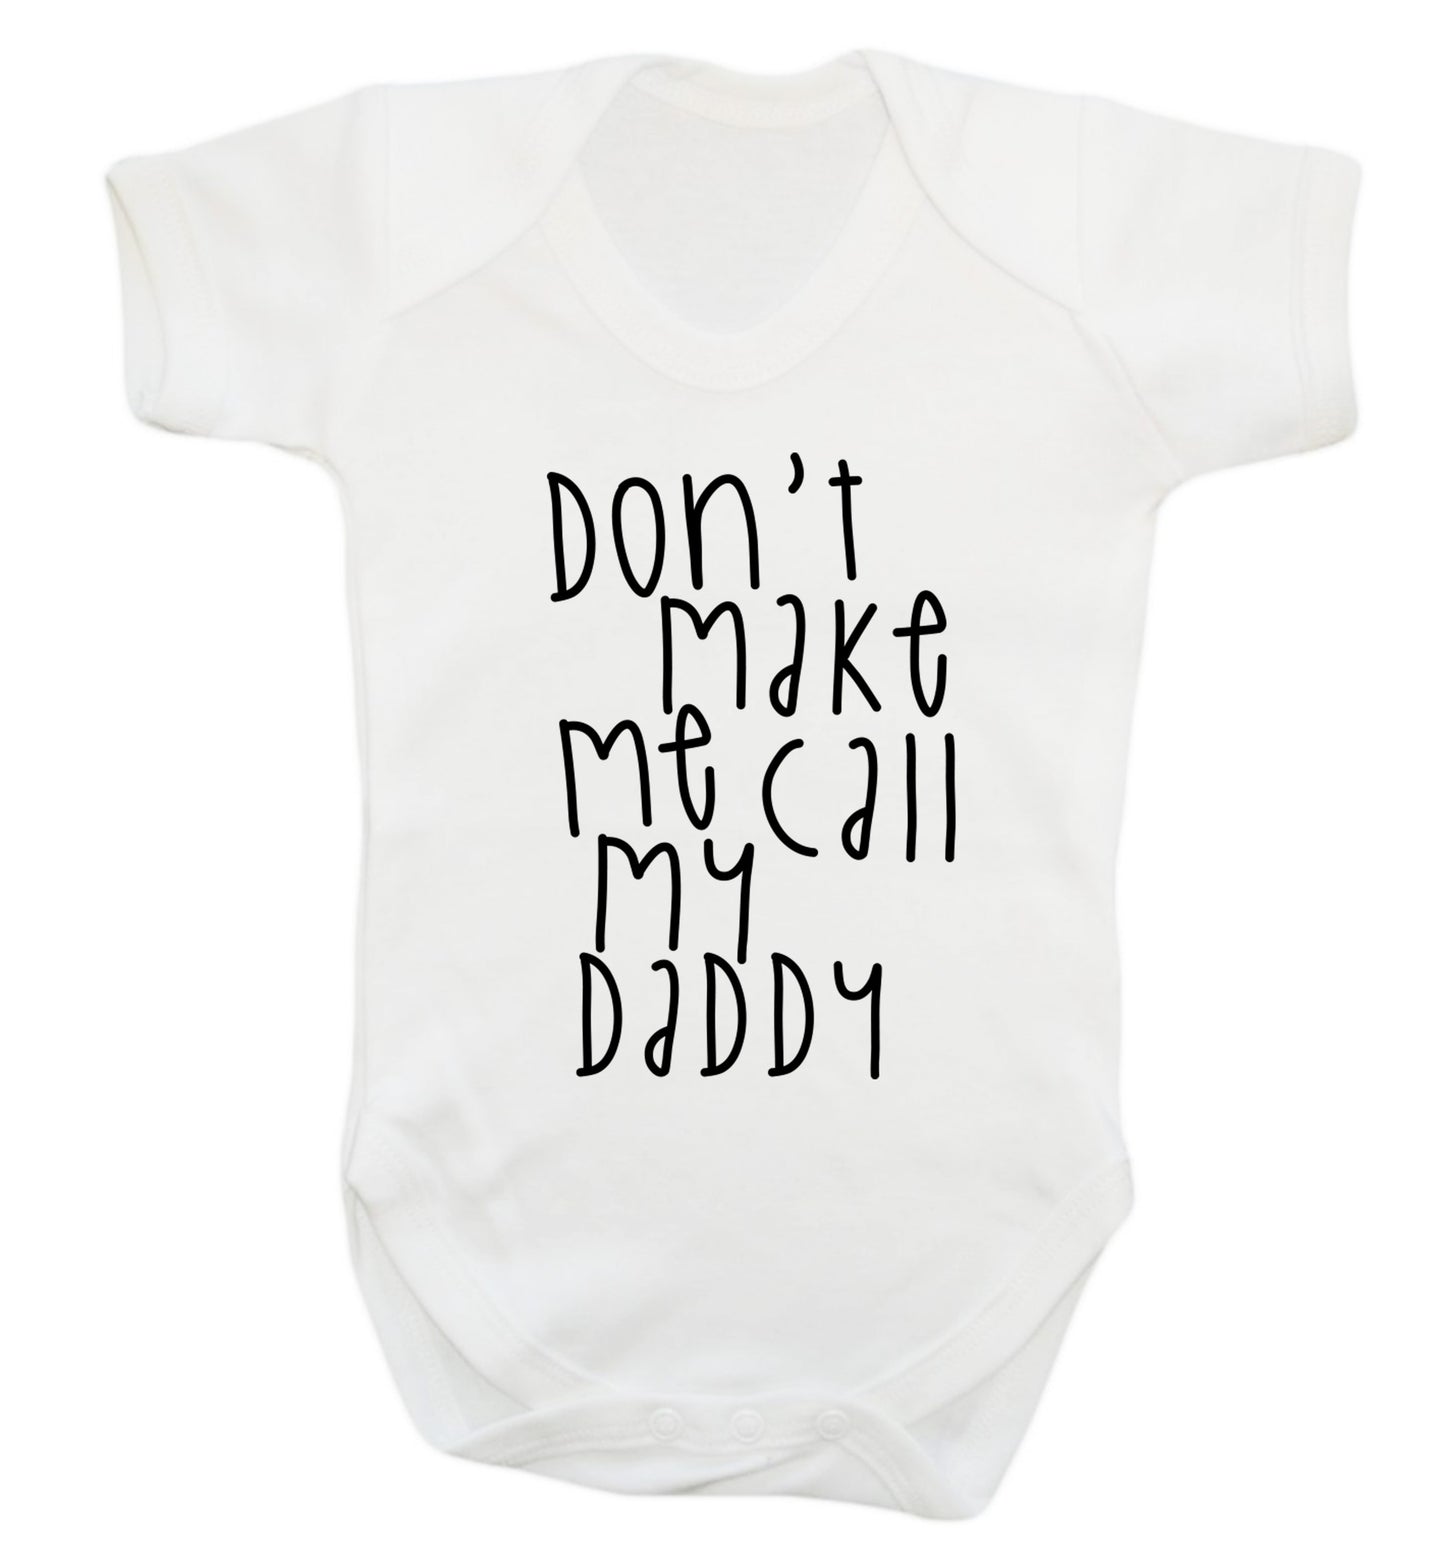 Don't make me call my daddy Baby Vest white 18-24 months